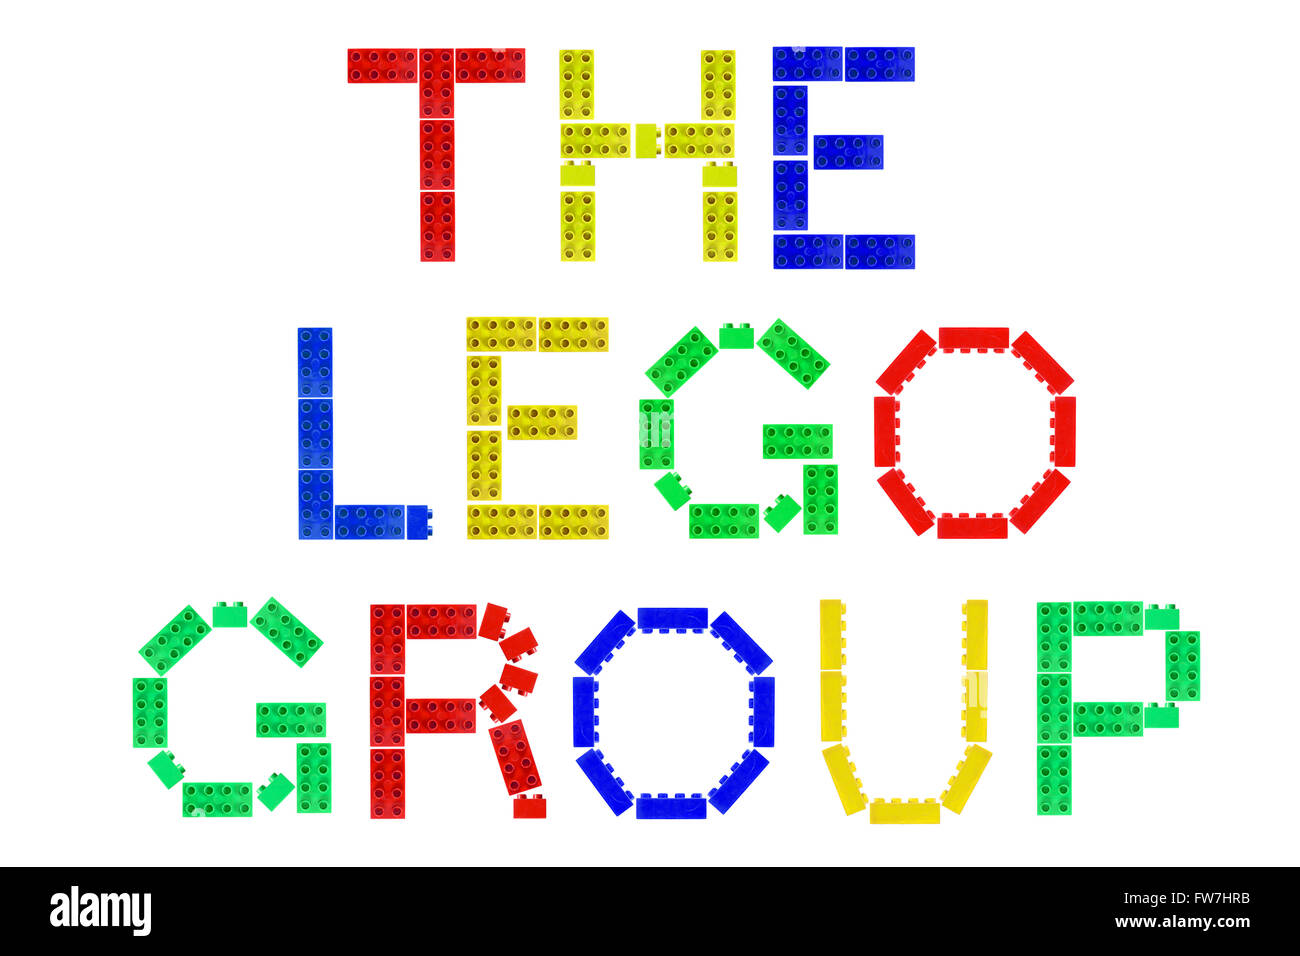 The lego group hi-res stock photography and images - Alamy